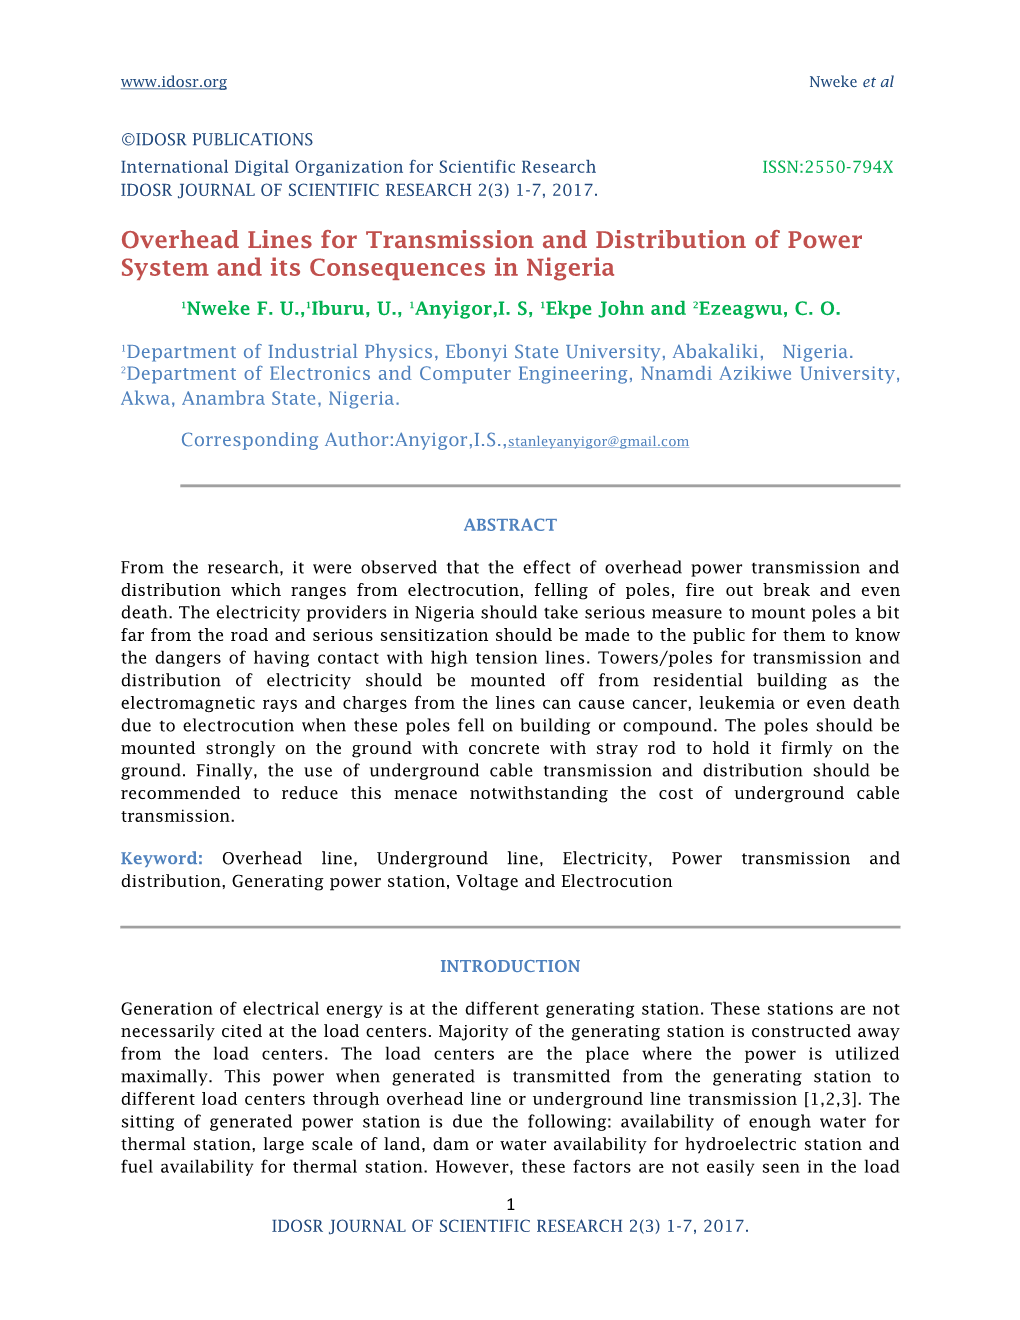 Overhead Lines for Transmission and Distribution of Power System and Its Consequences in Nigeria